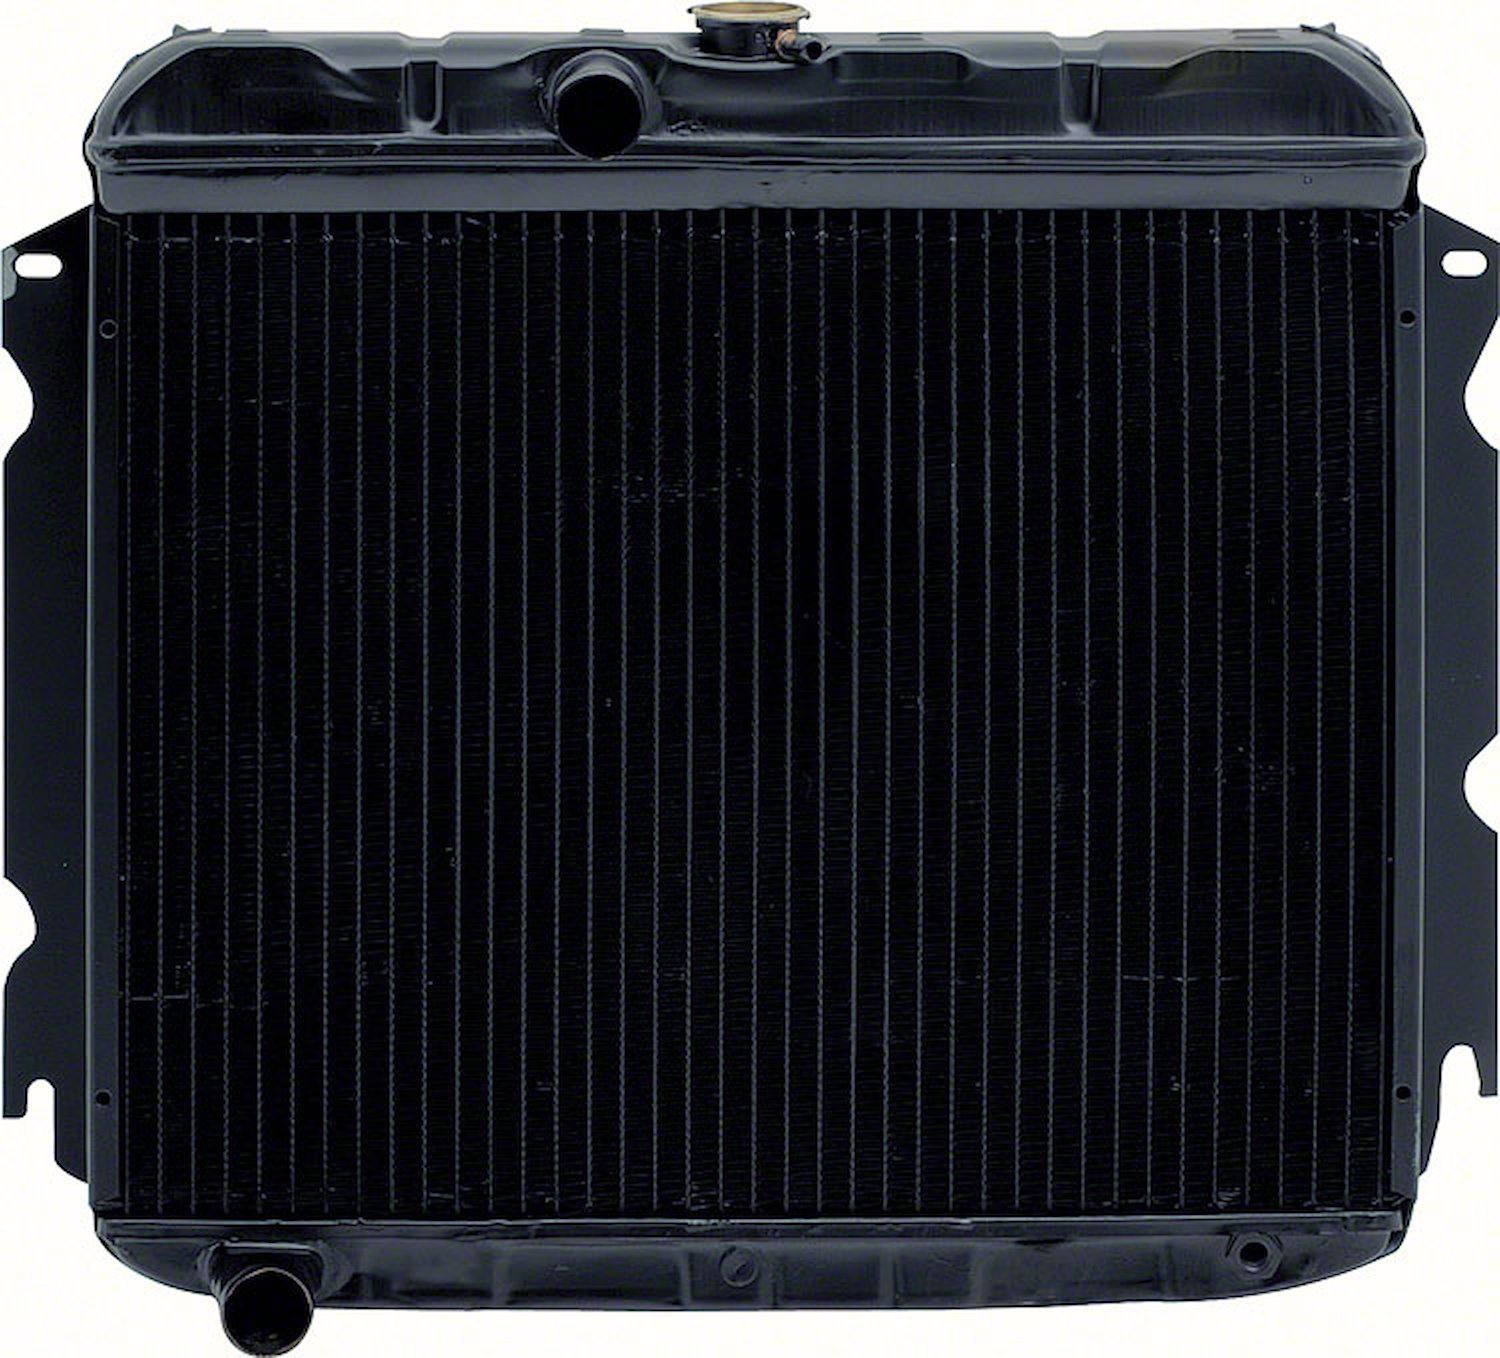 MA2258S Replacement Radiator 1967-69 Mopar A-Body Small Block V8 With Standard Trans 4 Row